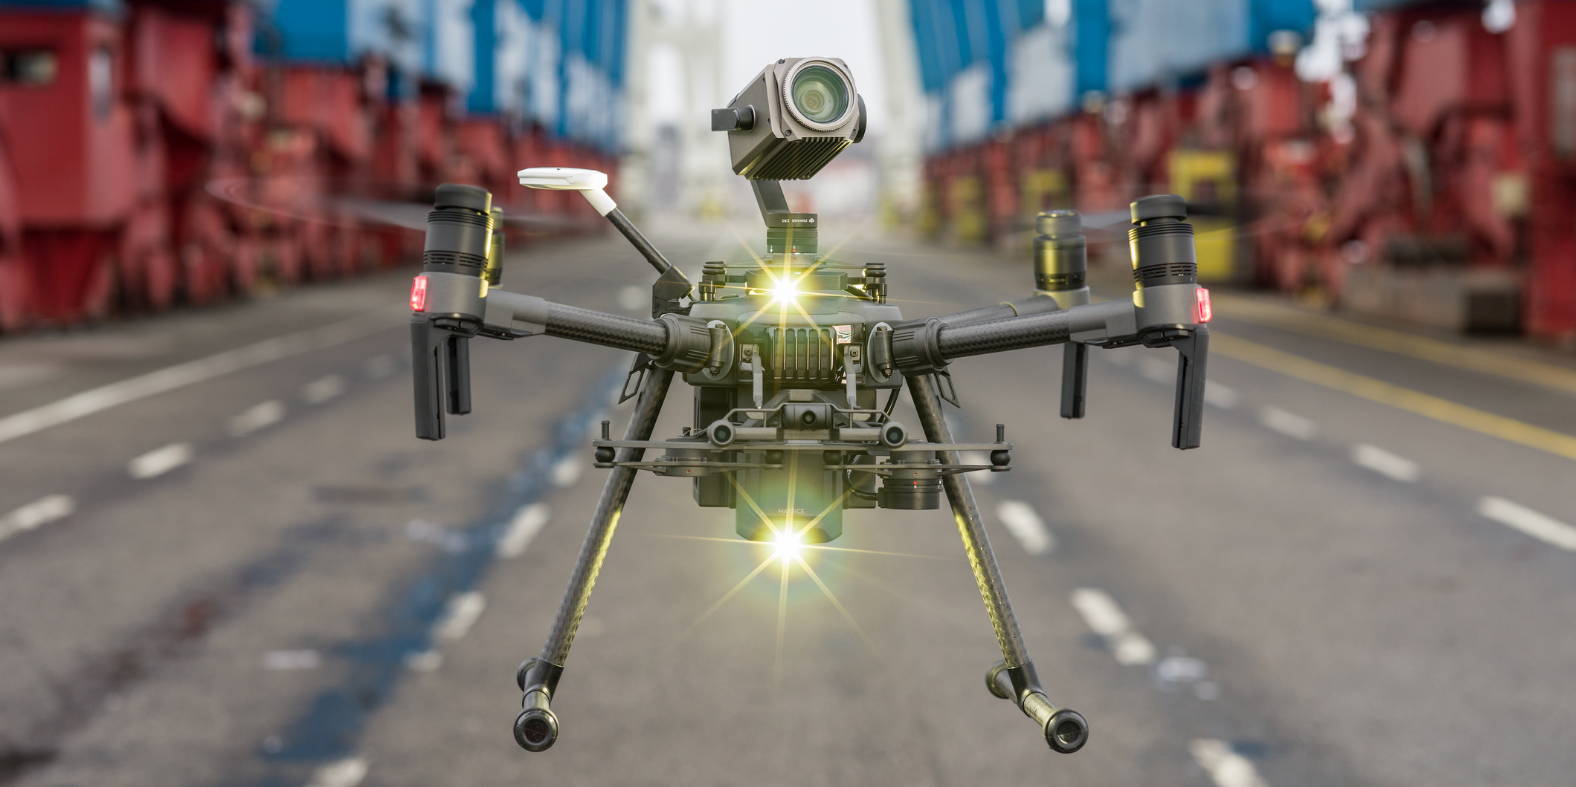 Enterprise Drone Buyers Guide | Choose the Best Drone for the Job